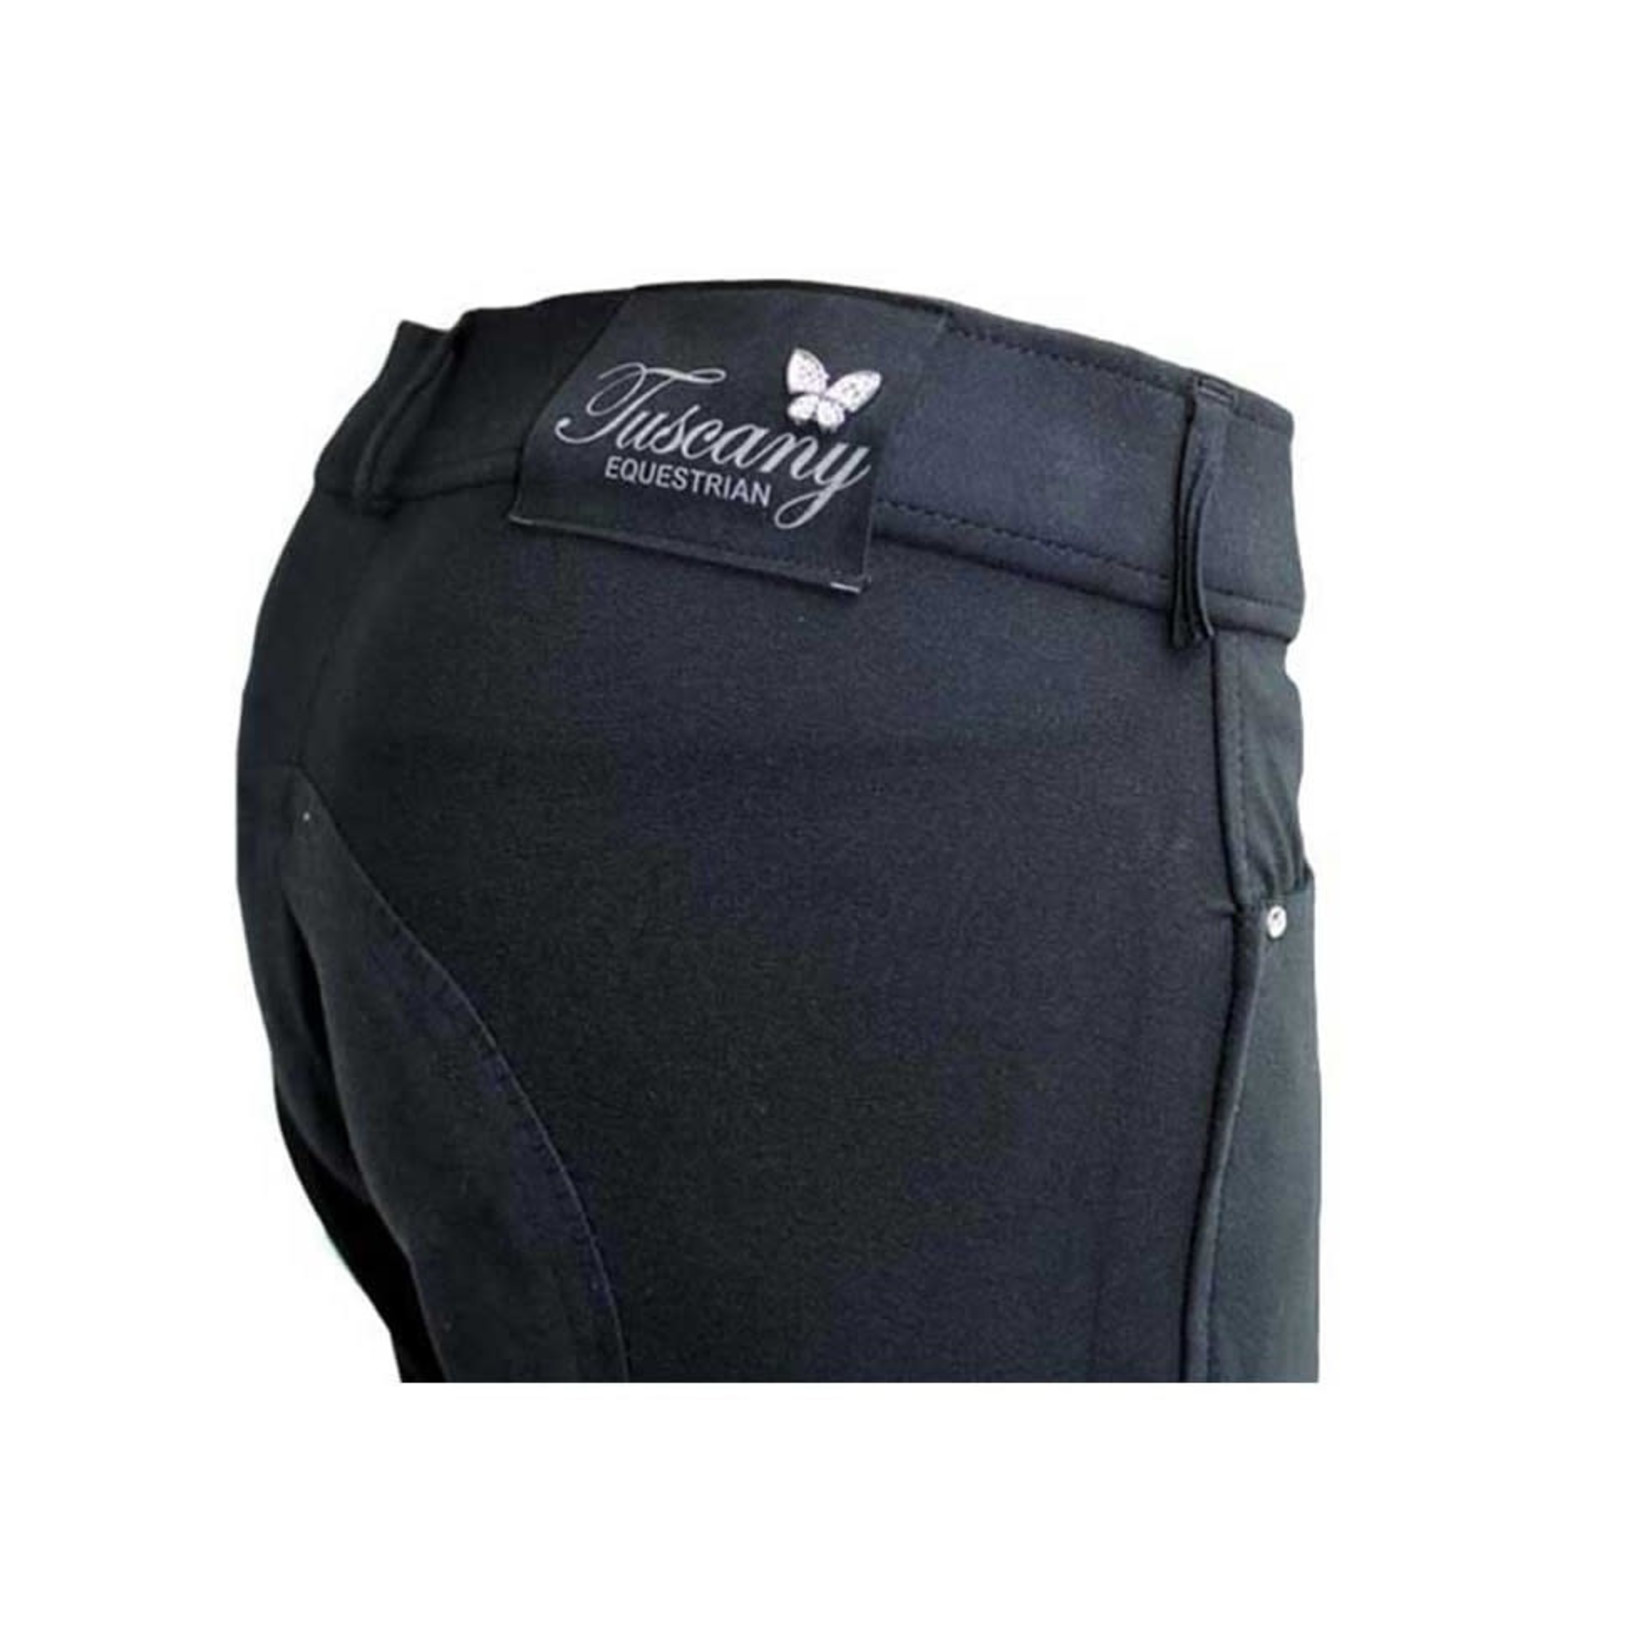 Tuscany Equestrian Tuscany SportFit Knee Patch Breeches